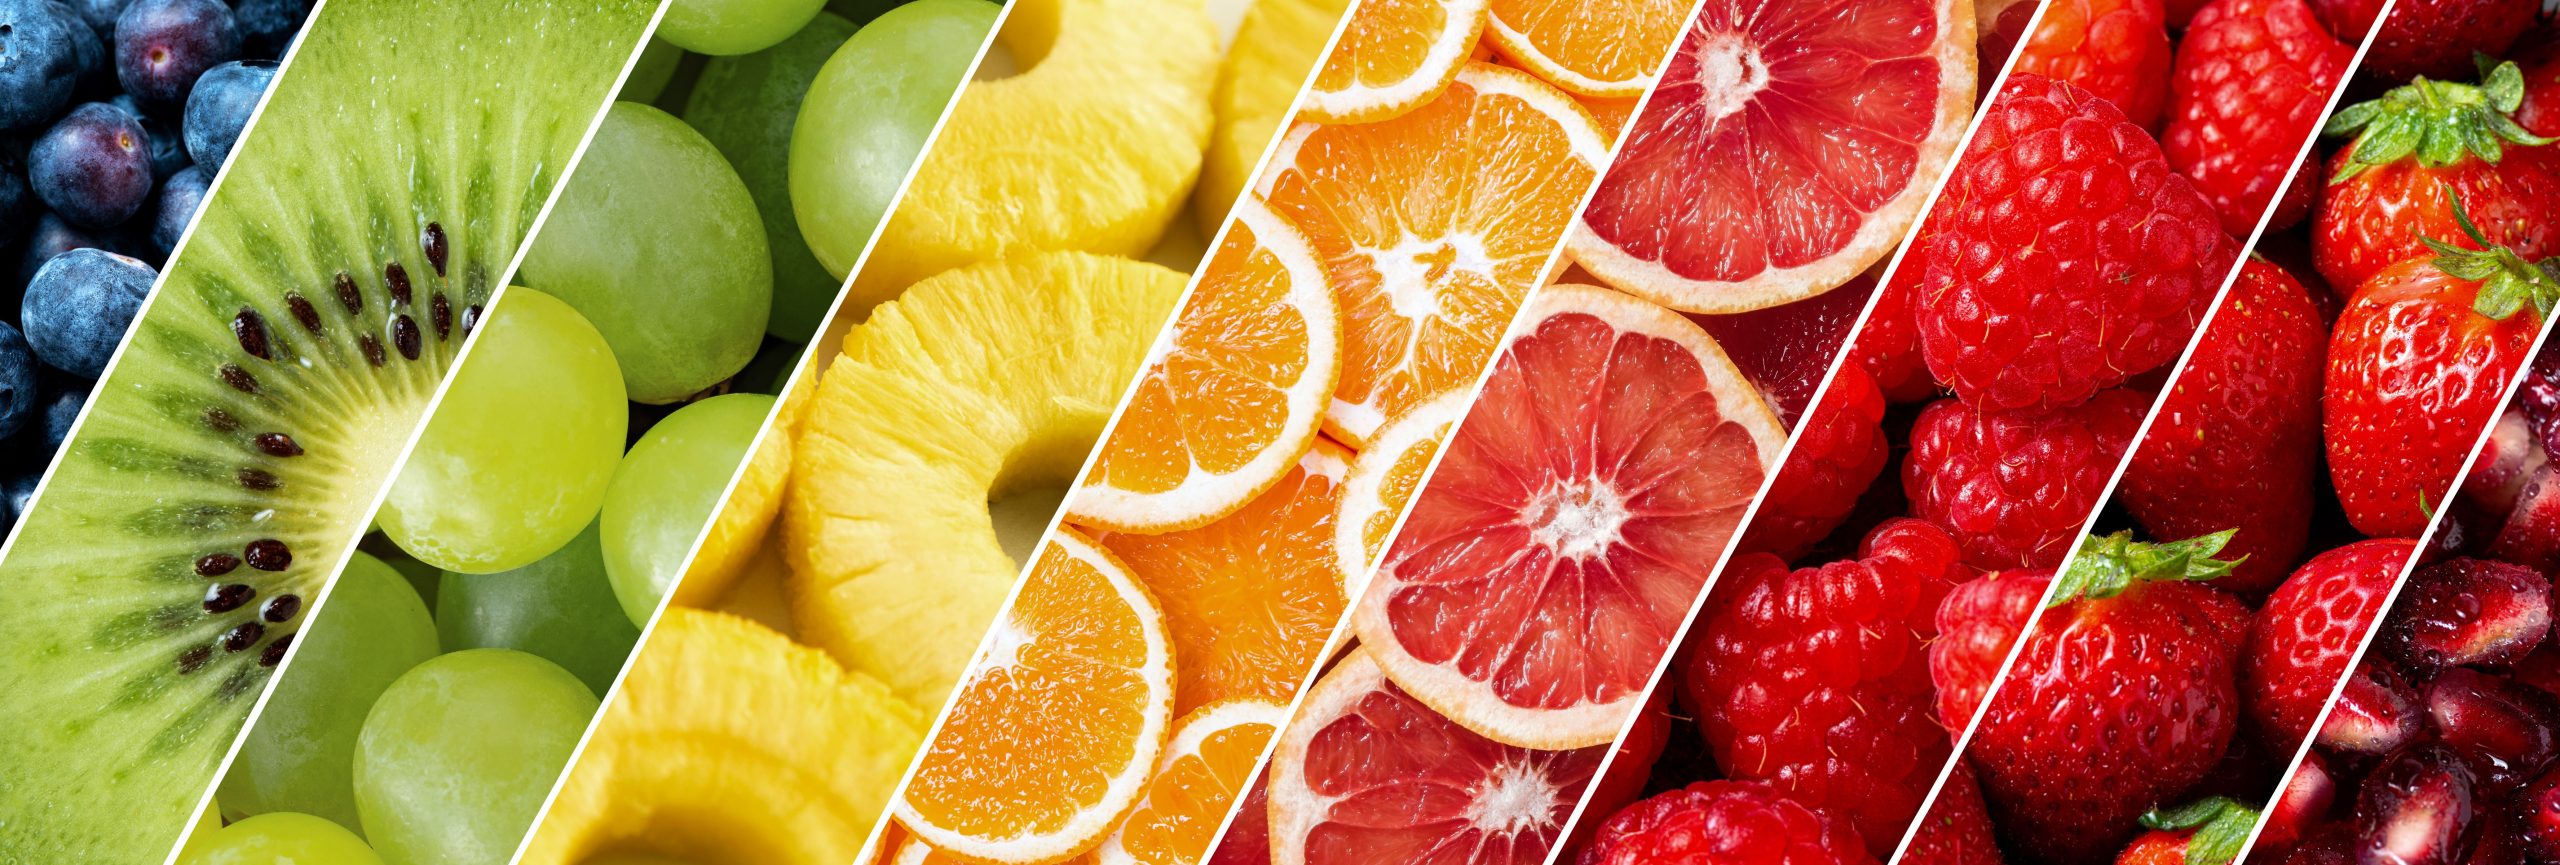 colorful-collage-fruits-texture-close-up